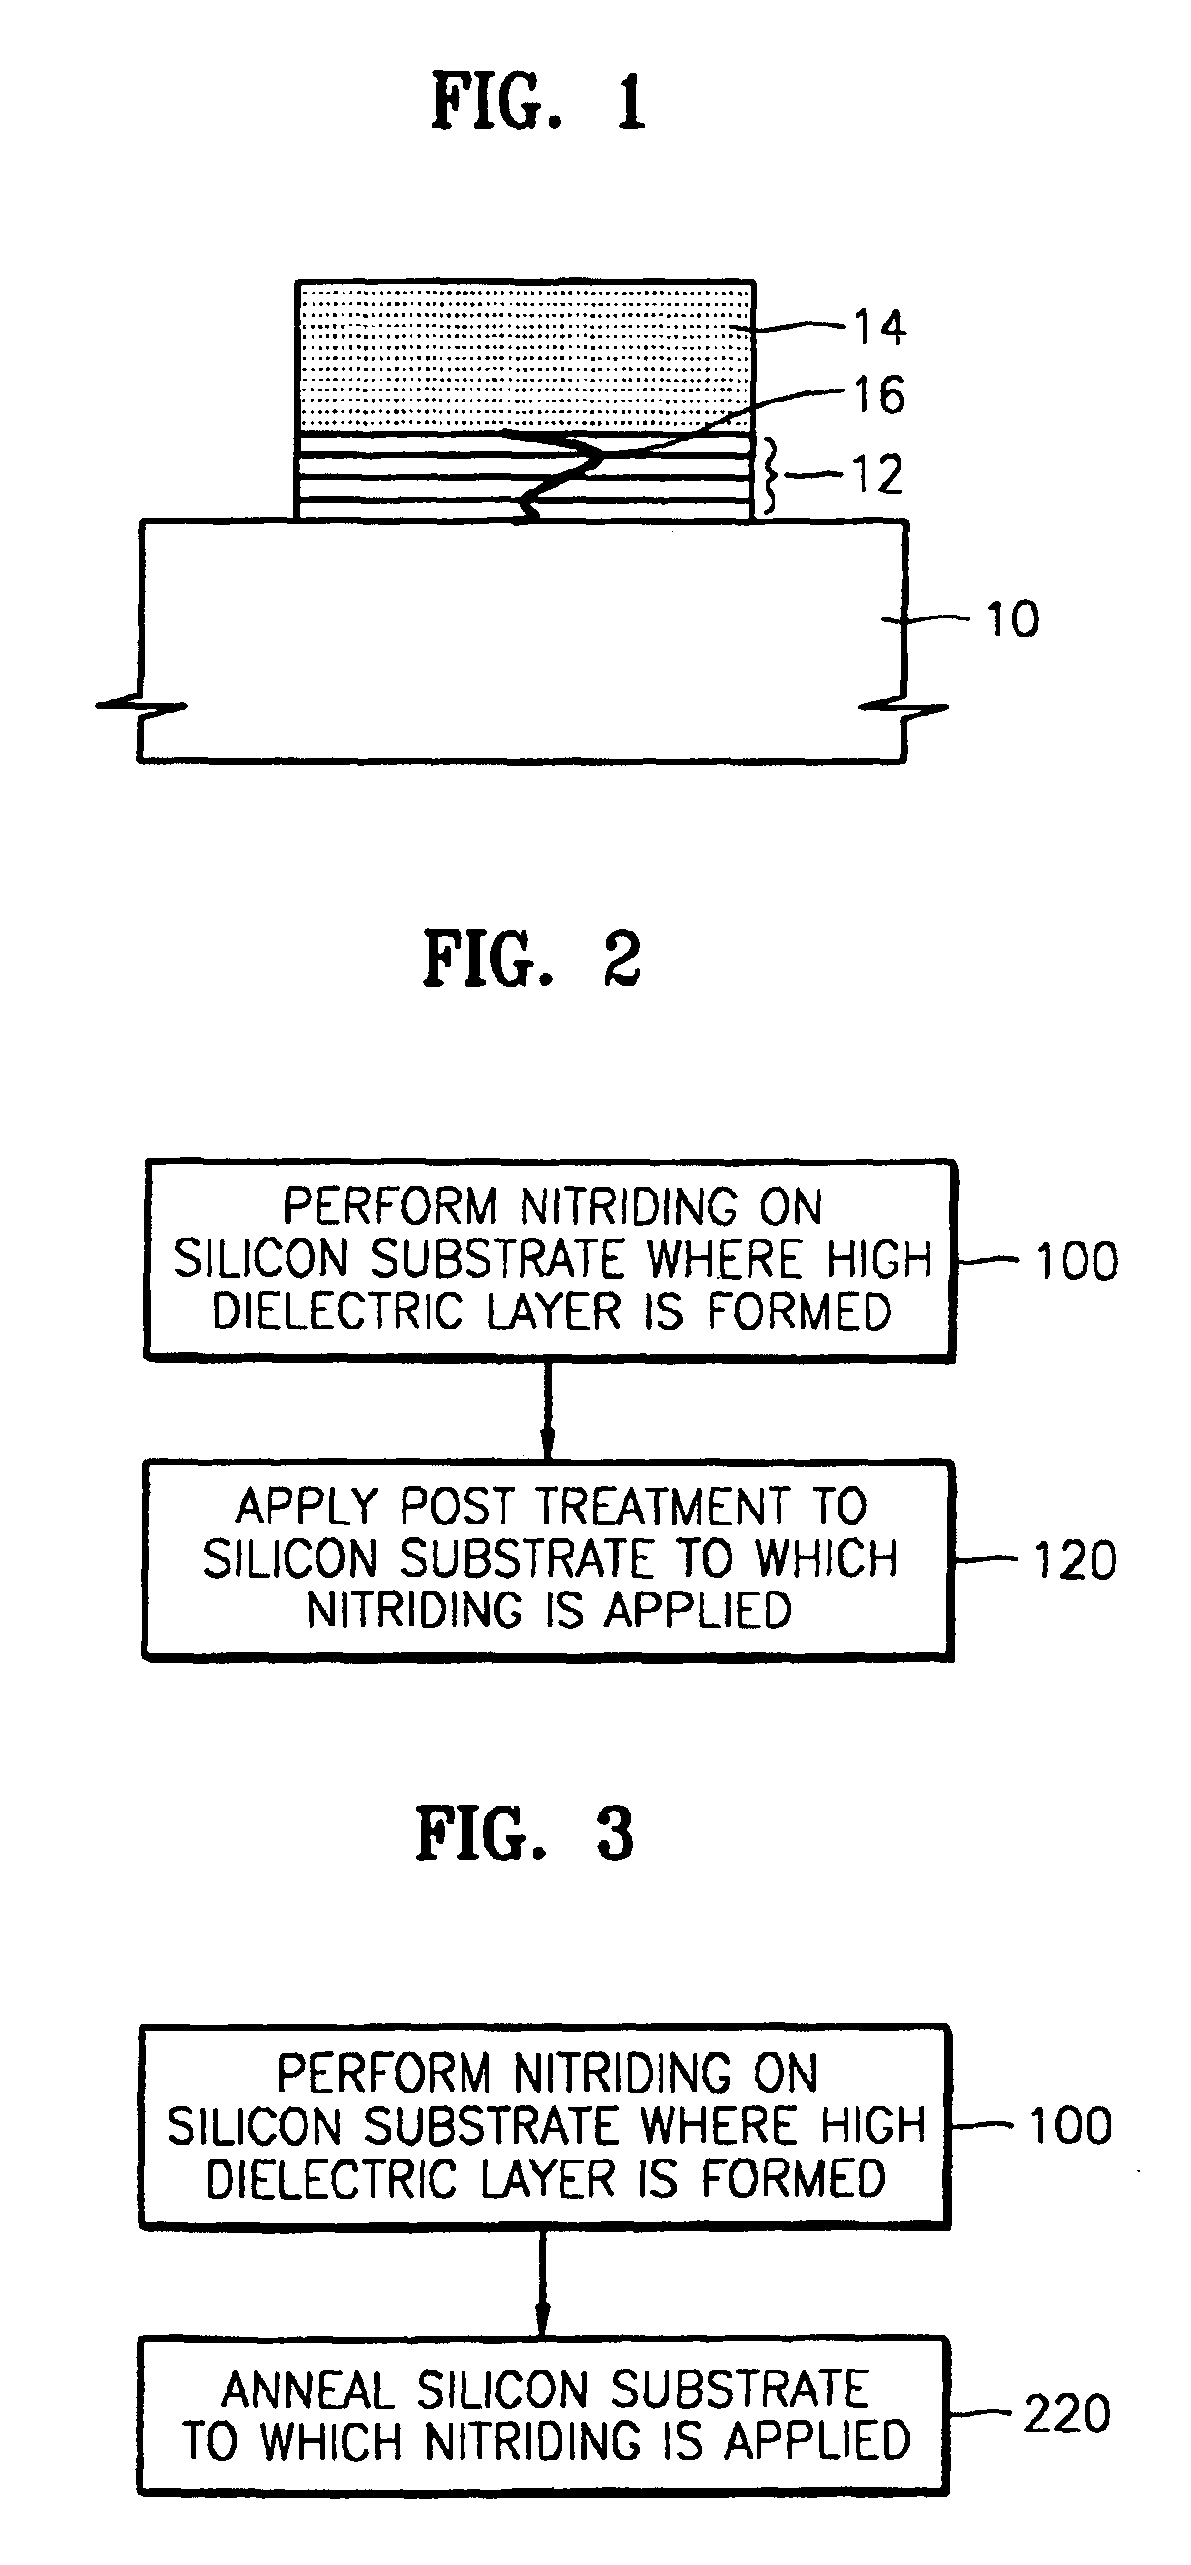 Post thermal treatment methods of forming high dielectric layers in integrated circuit devices